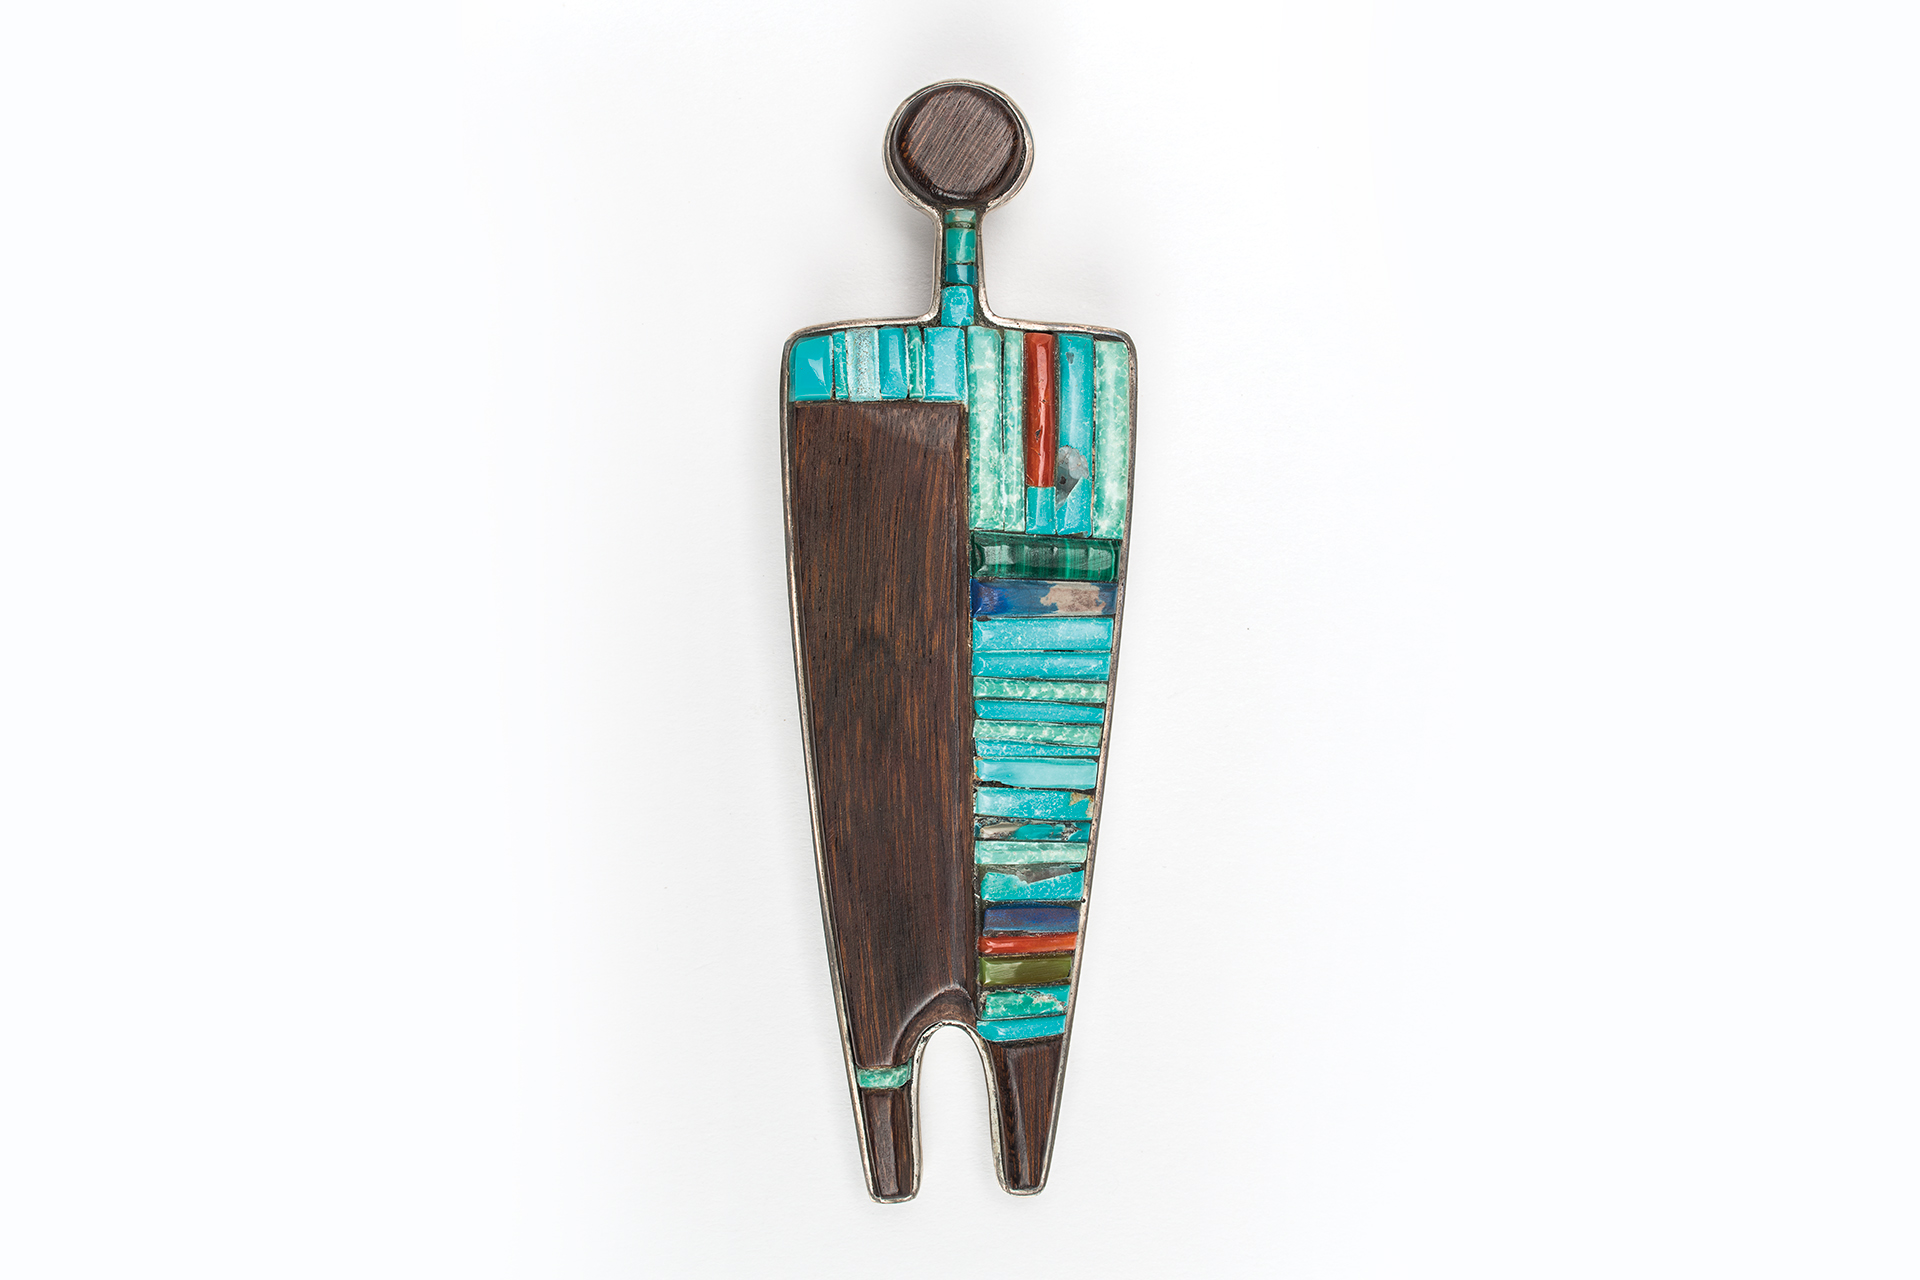 A wooden jewelry pendant with a blue and turquoise design.